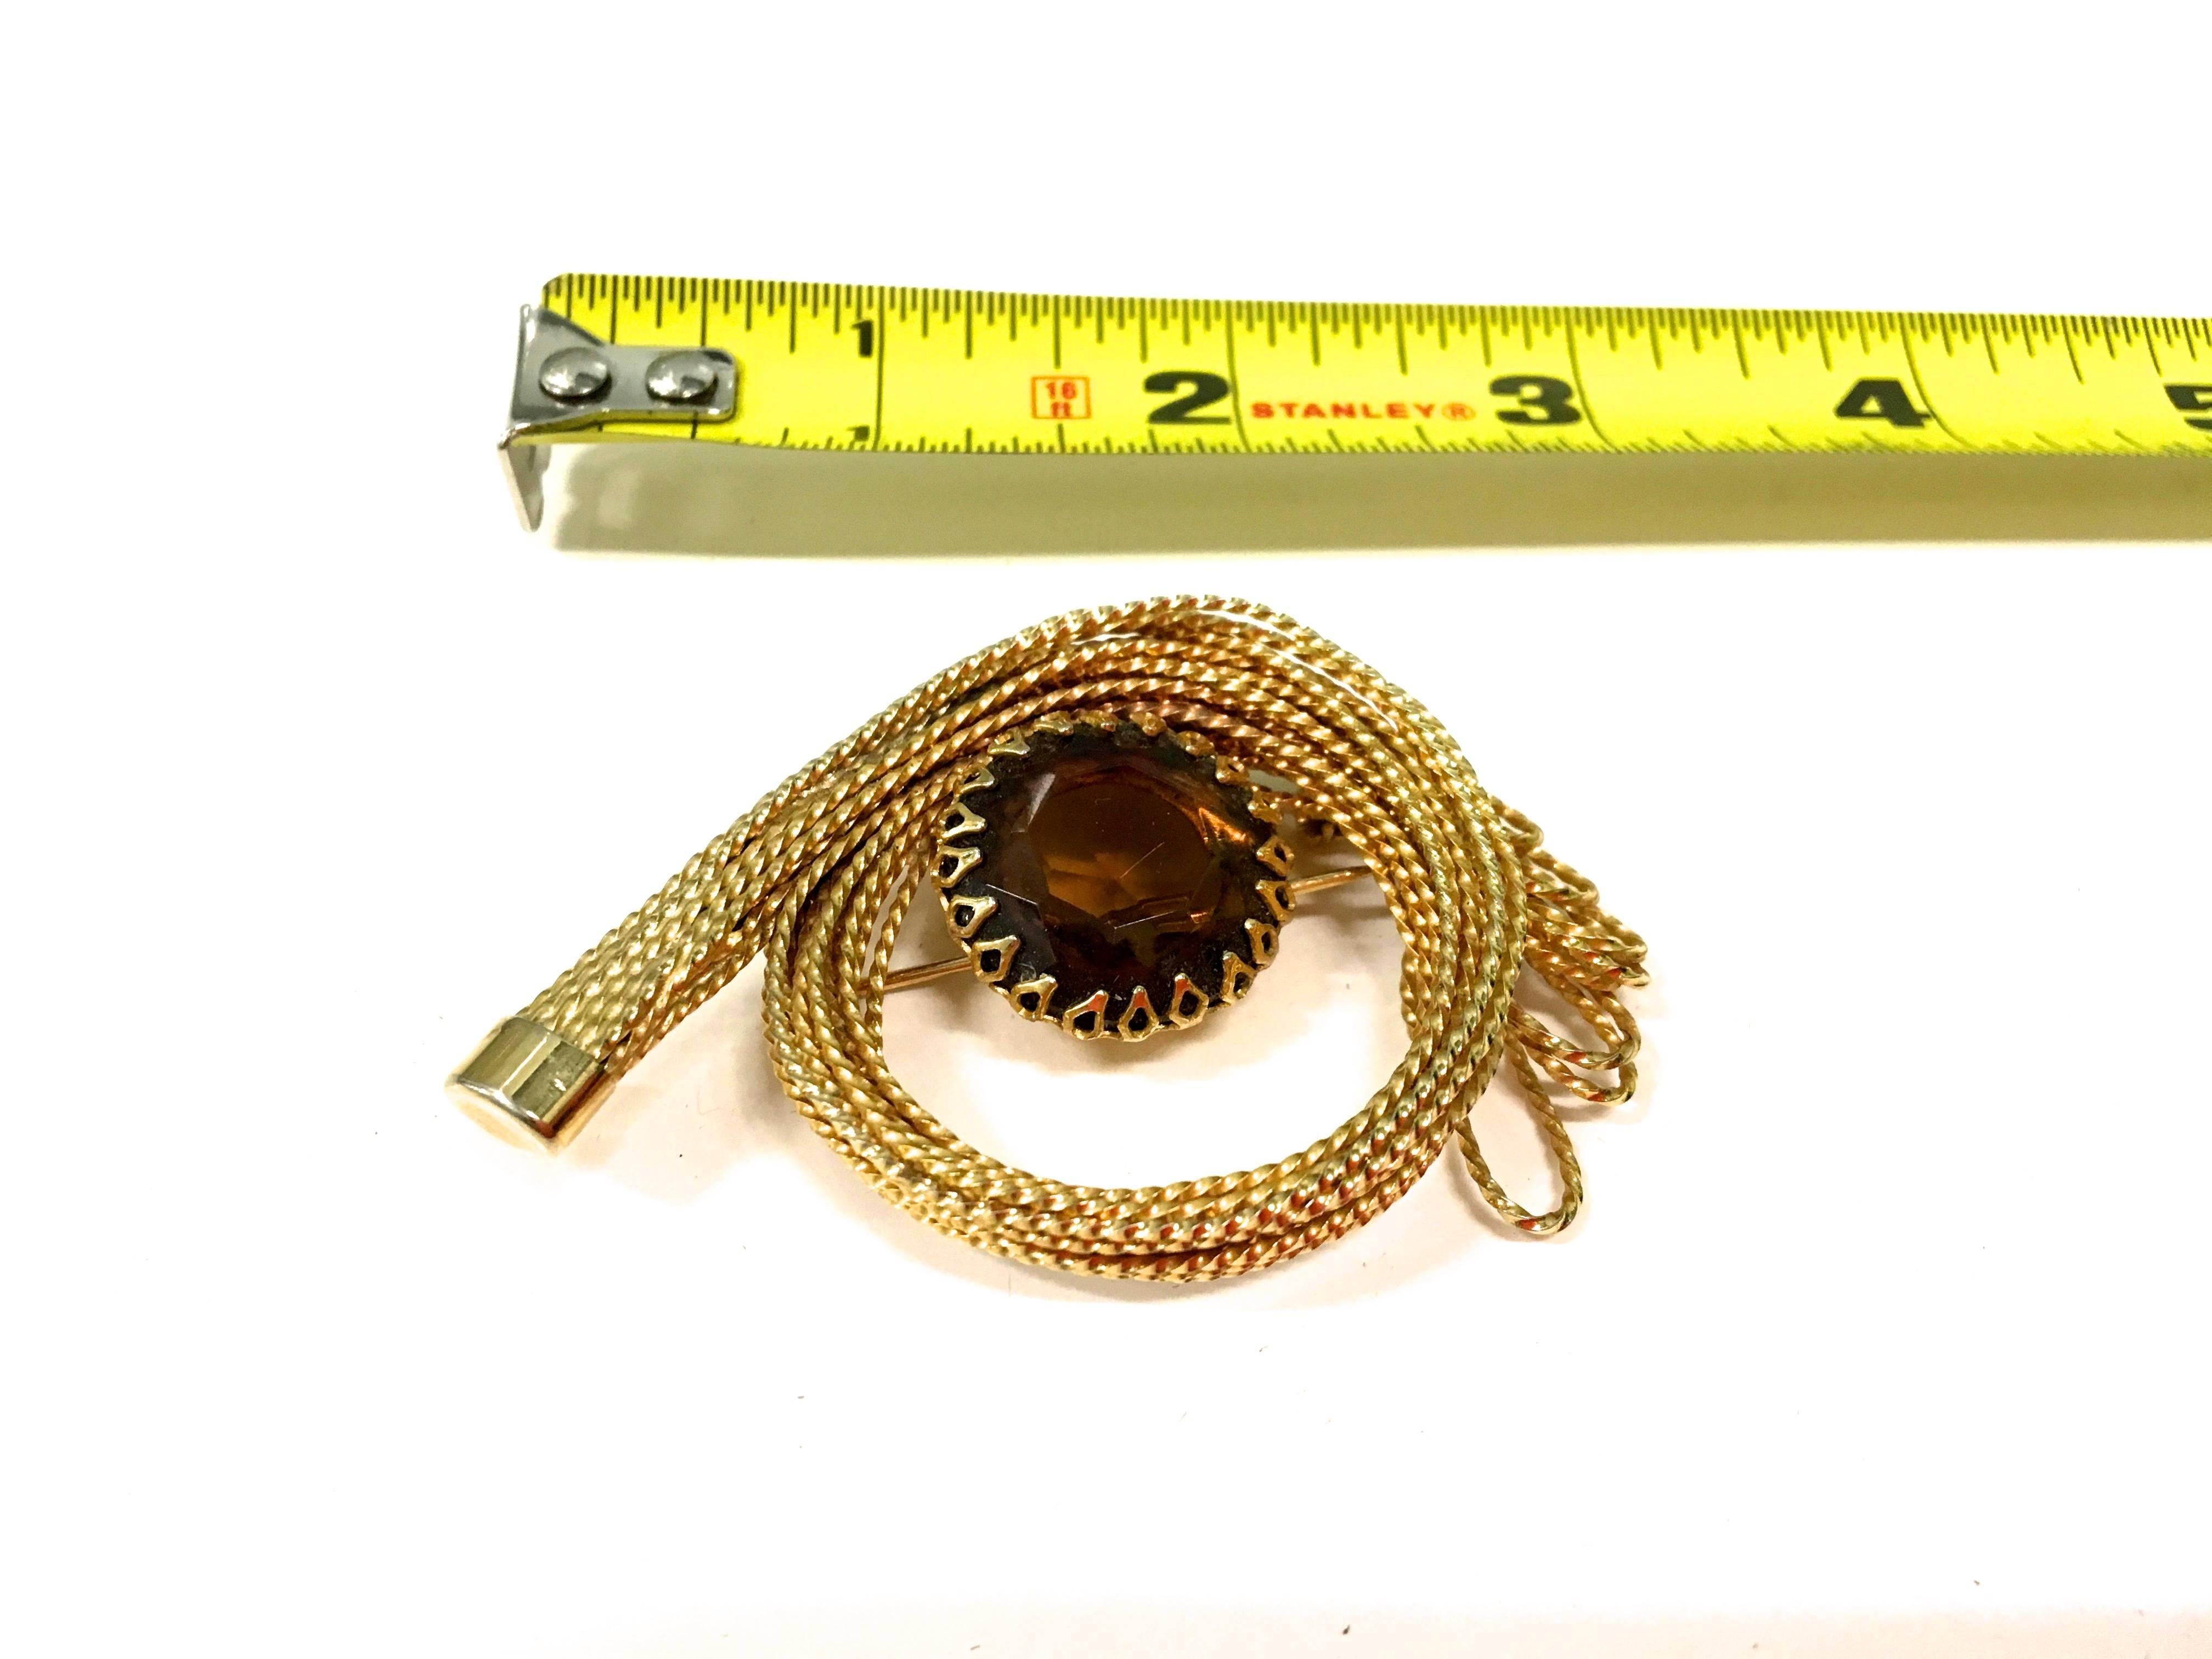 Presented here is a beautiful 1950’s gold tone metal brooch. At the center of the brooch, there is a dark amber colored gem stone that is fastened to the pin with triangular rivets. There is a clasped pin on the back of the pin. Surrounding the